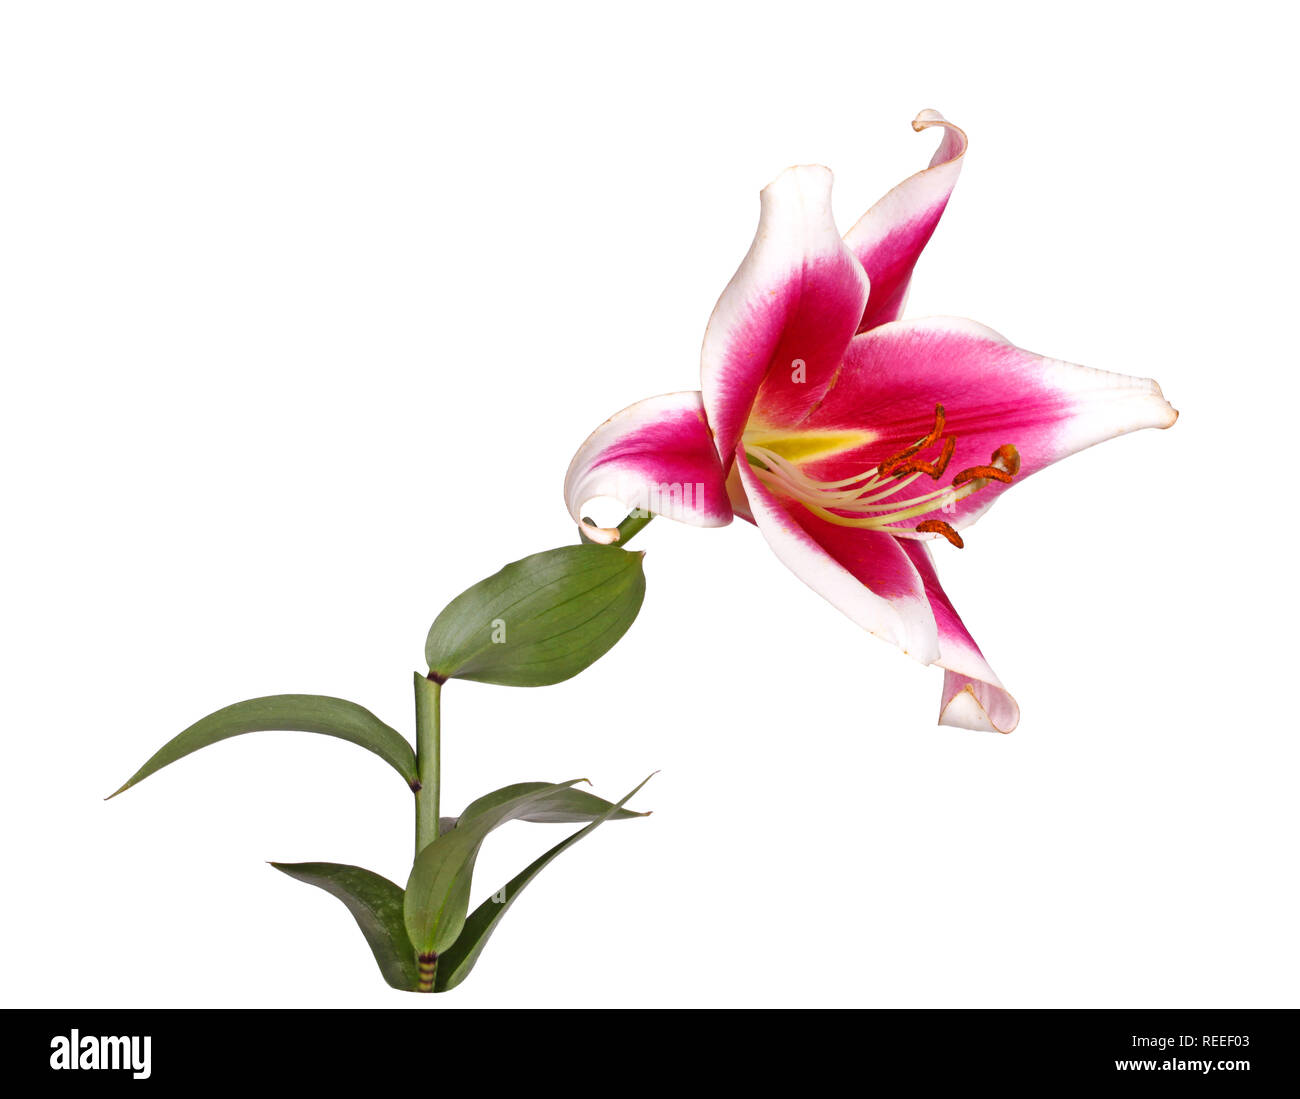 Stem with a single bright red and white flower of an Orienpet lily hybrid isolated against a white background Stock Photo